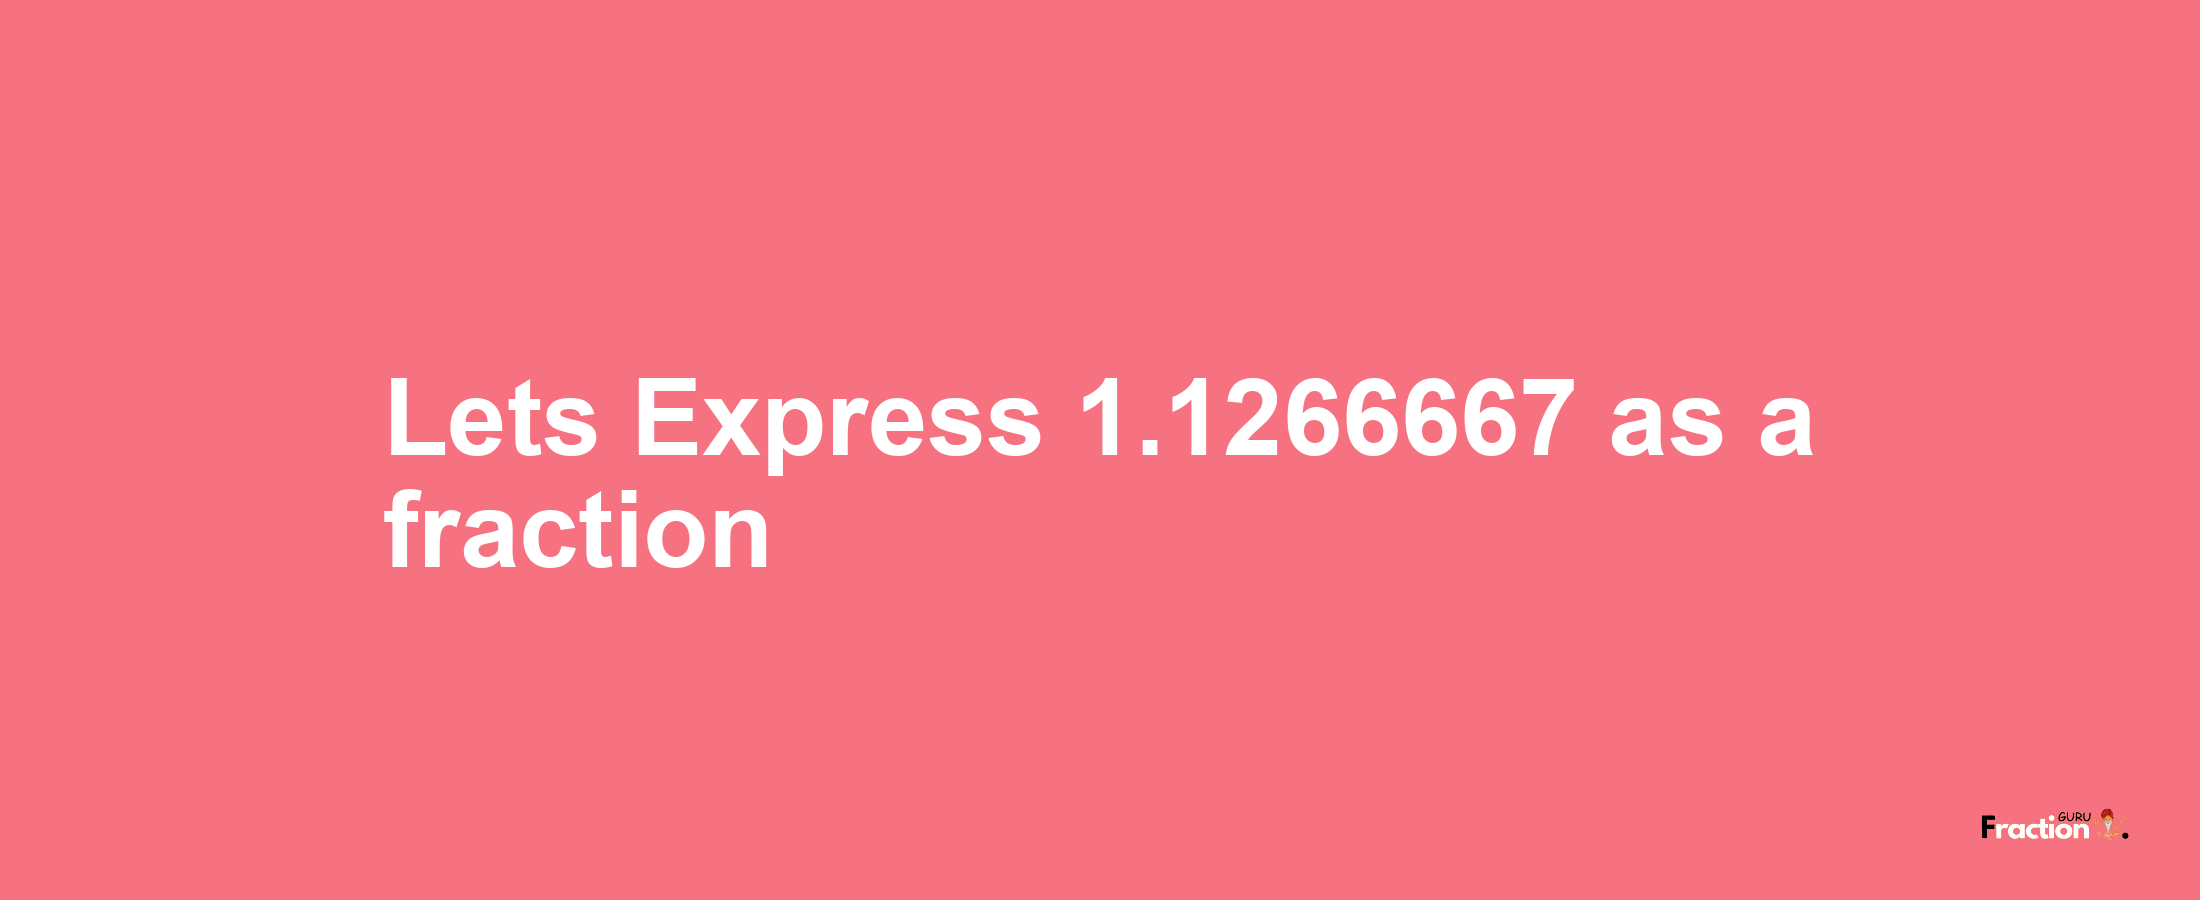 Lets Express 1.1266667 as afraction